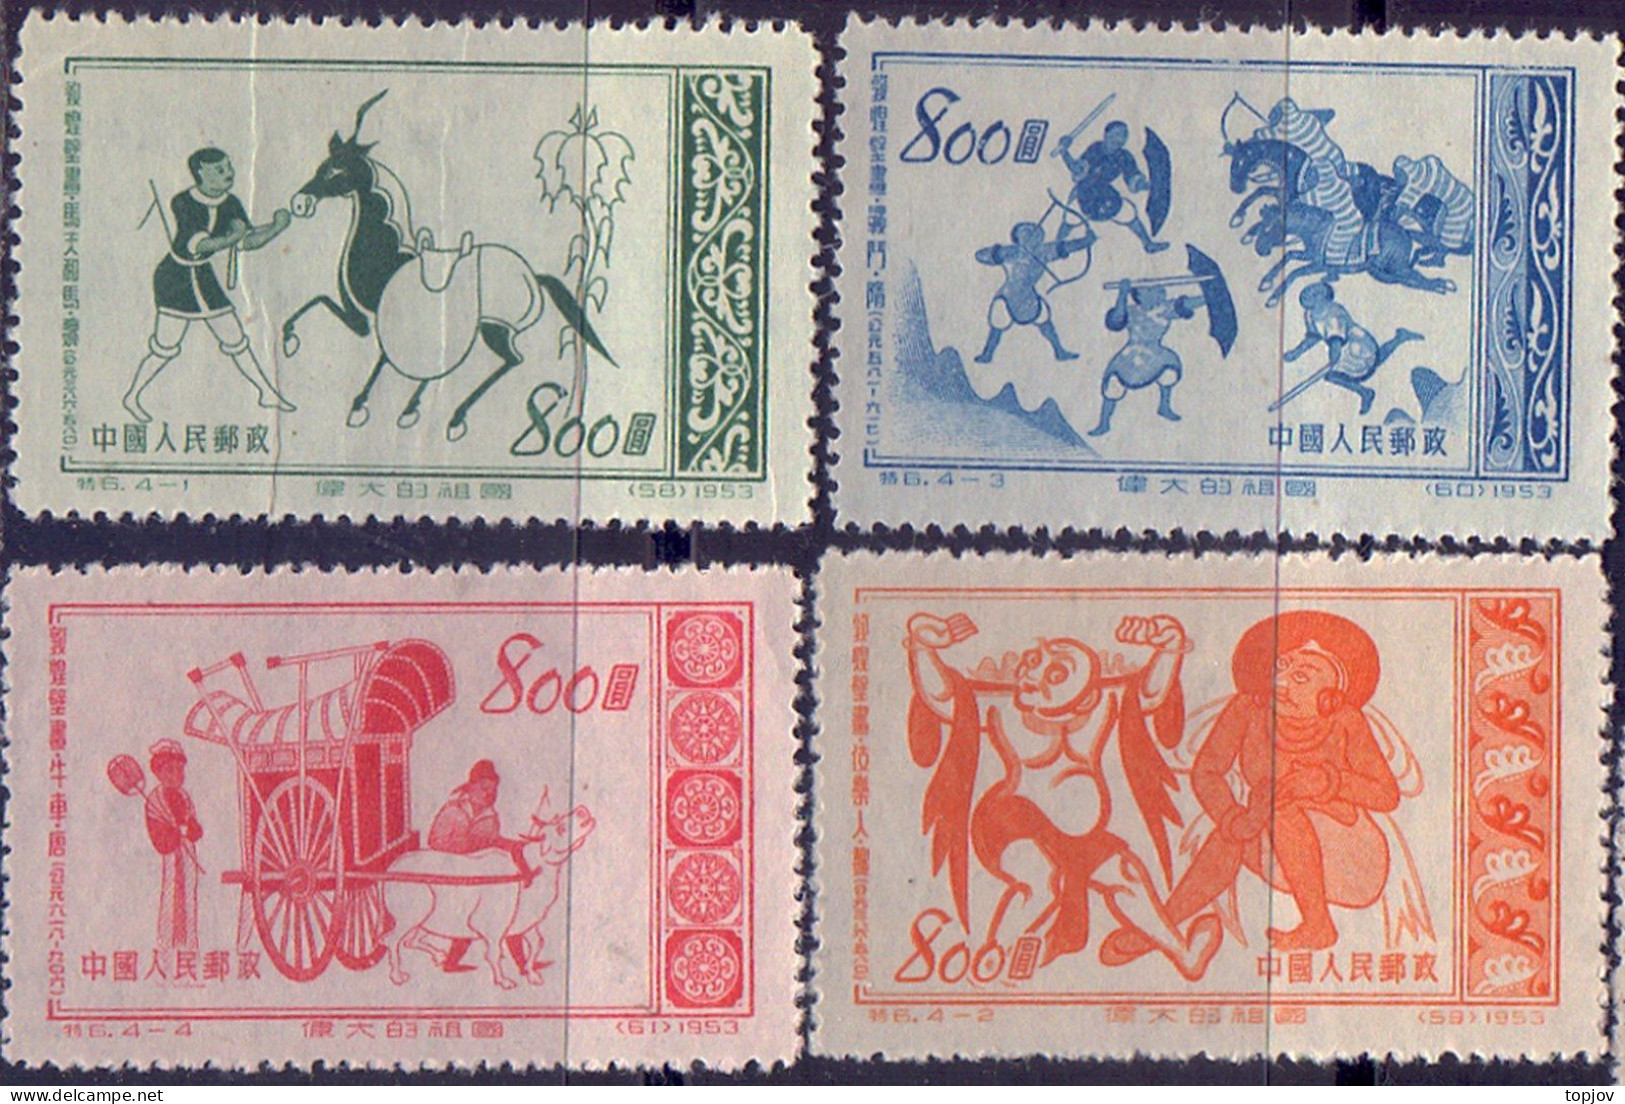 CHINA - ART - MURAL STAMPS  S6 - **MNH - 1953 - Unused Stamps